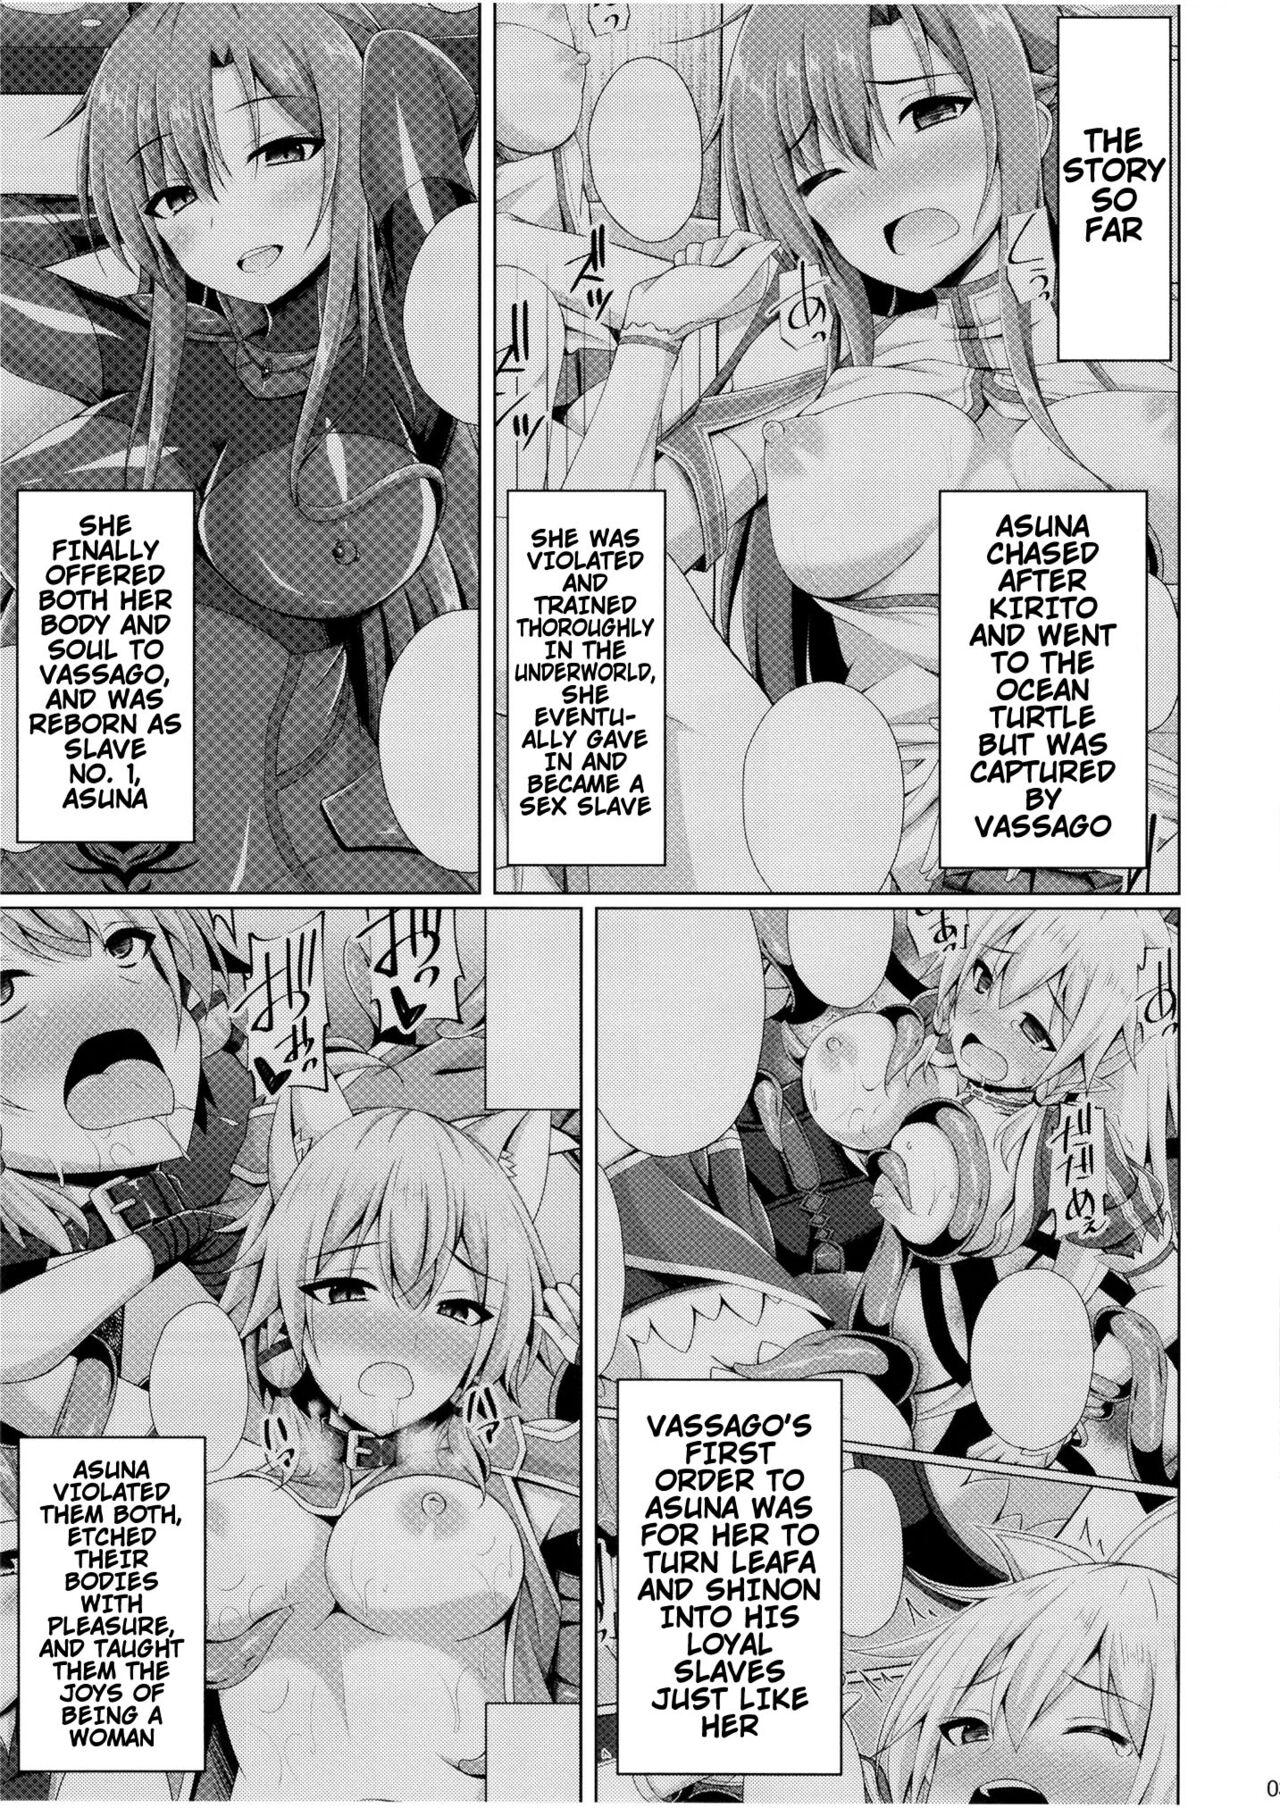 Shaking Kuro no Kenshito Yobareta Ore wa mou nai... | There's Nothing Left Of Me From When I Was The Black Knight - Sword art online Big Cock - Page 2